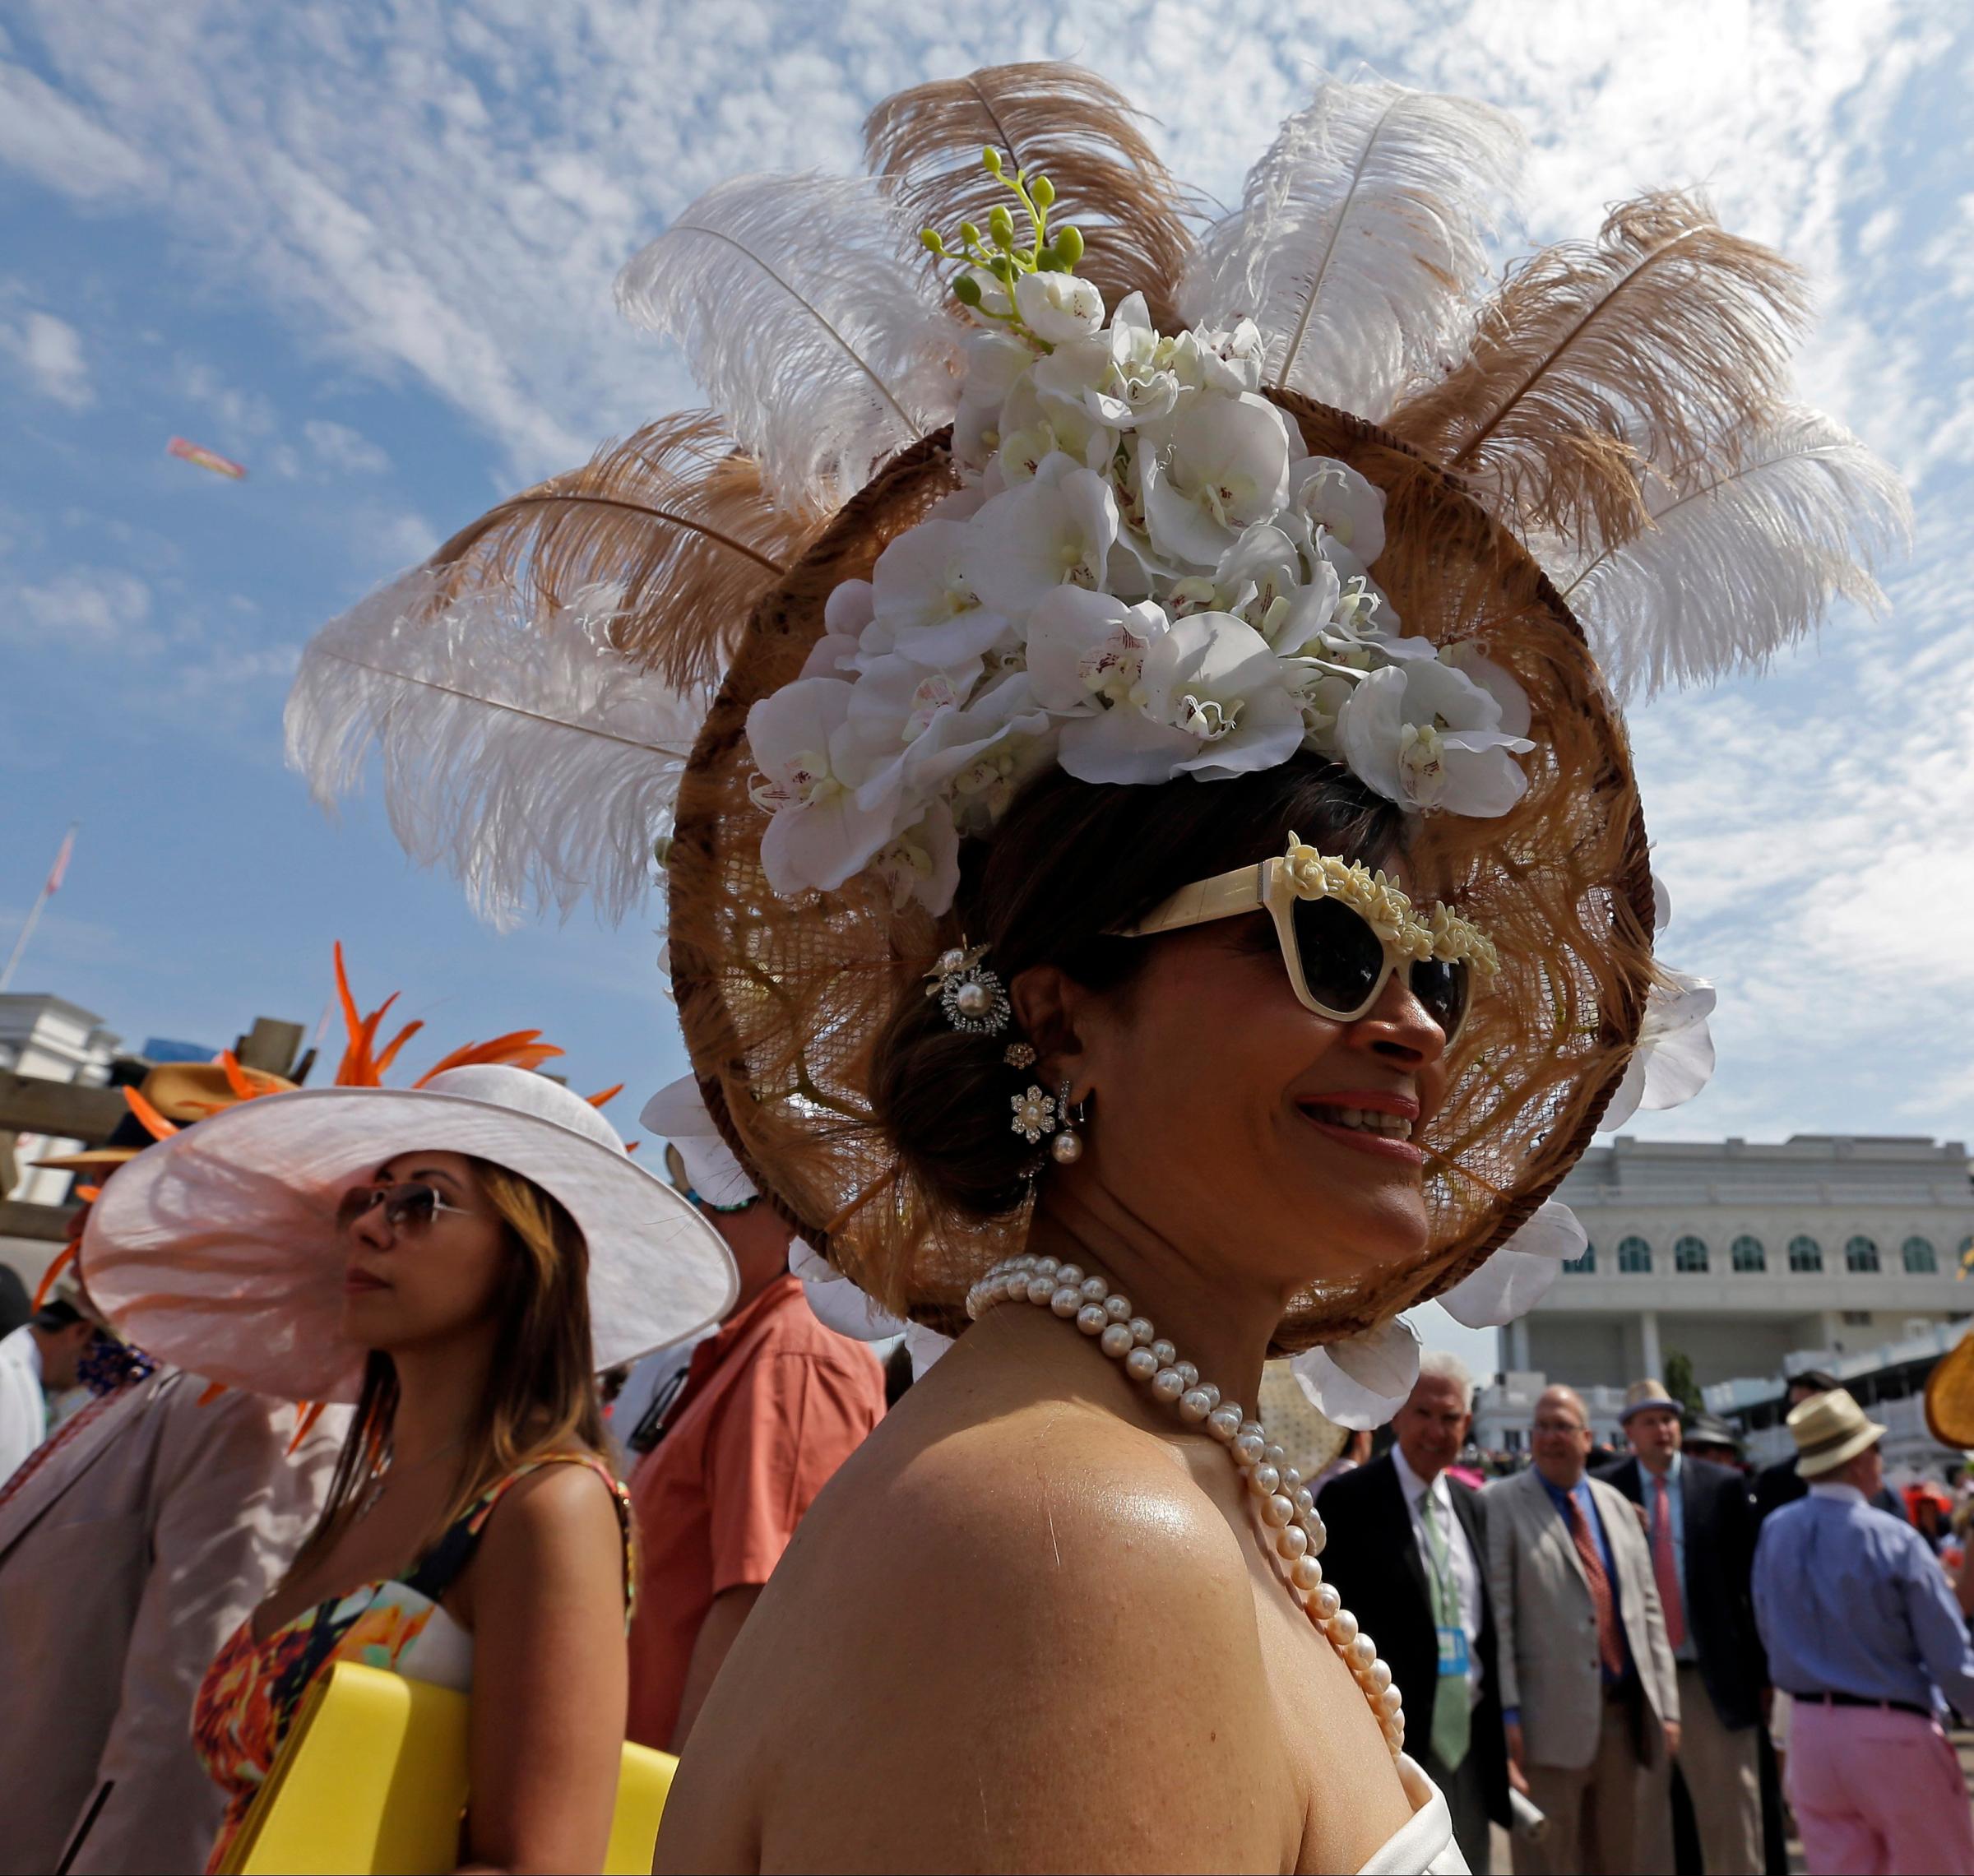 Woman with a hat during the 141st running of the Kentucky Oaks horse race at Churchill Downs on May 2, 2015, in Louisville, Ky.